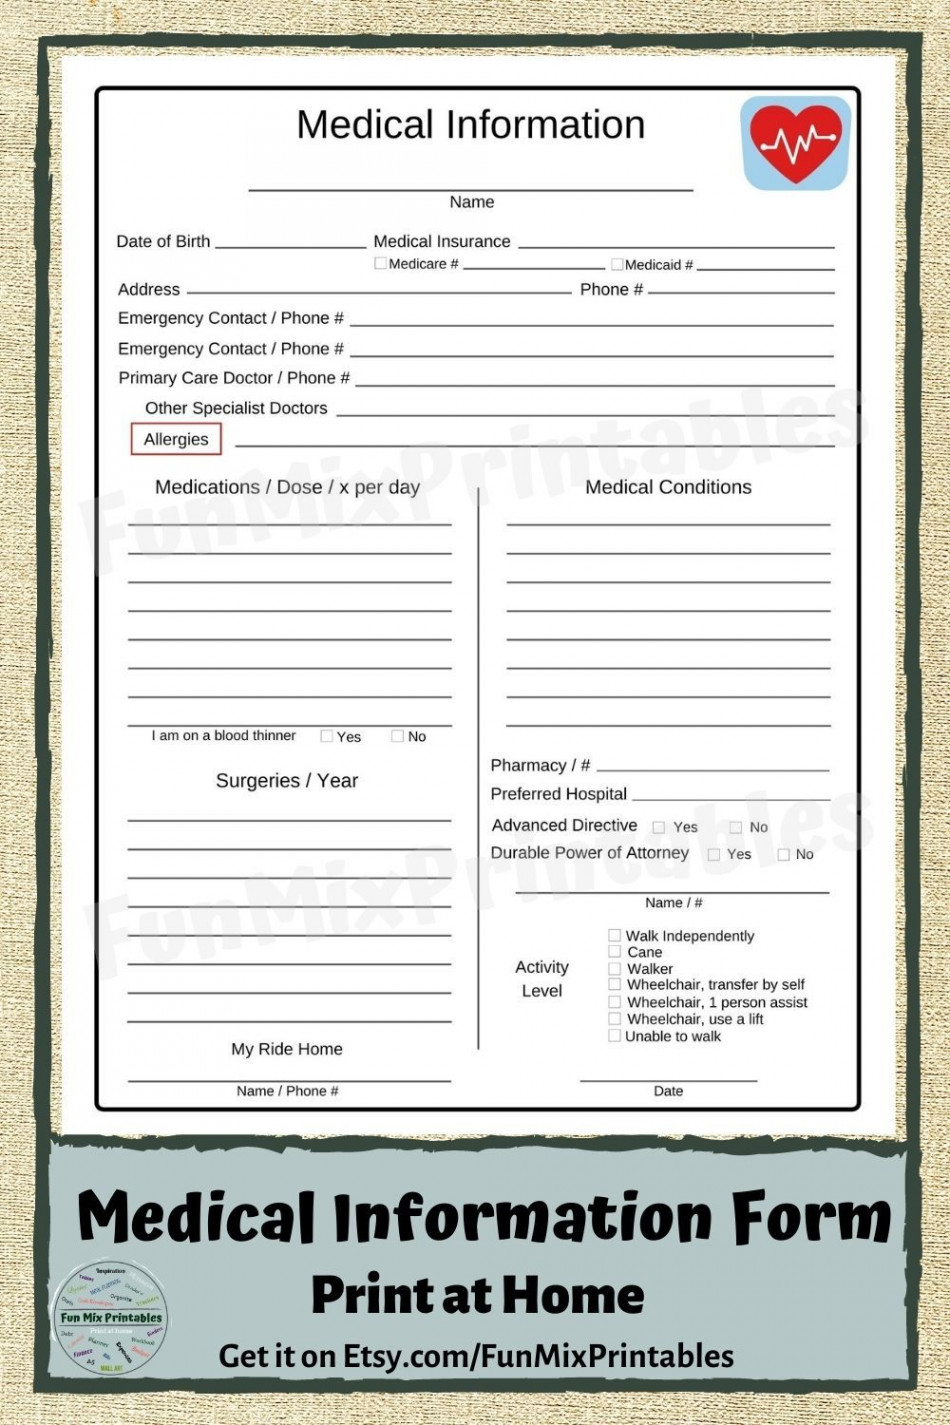 Medical Information Form / Emergency Contacts Form / Printable